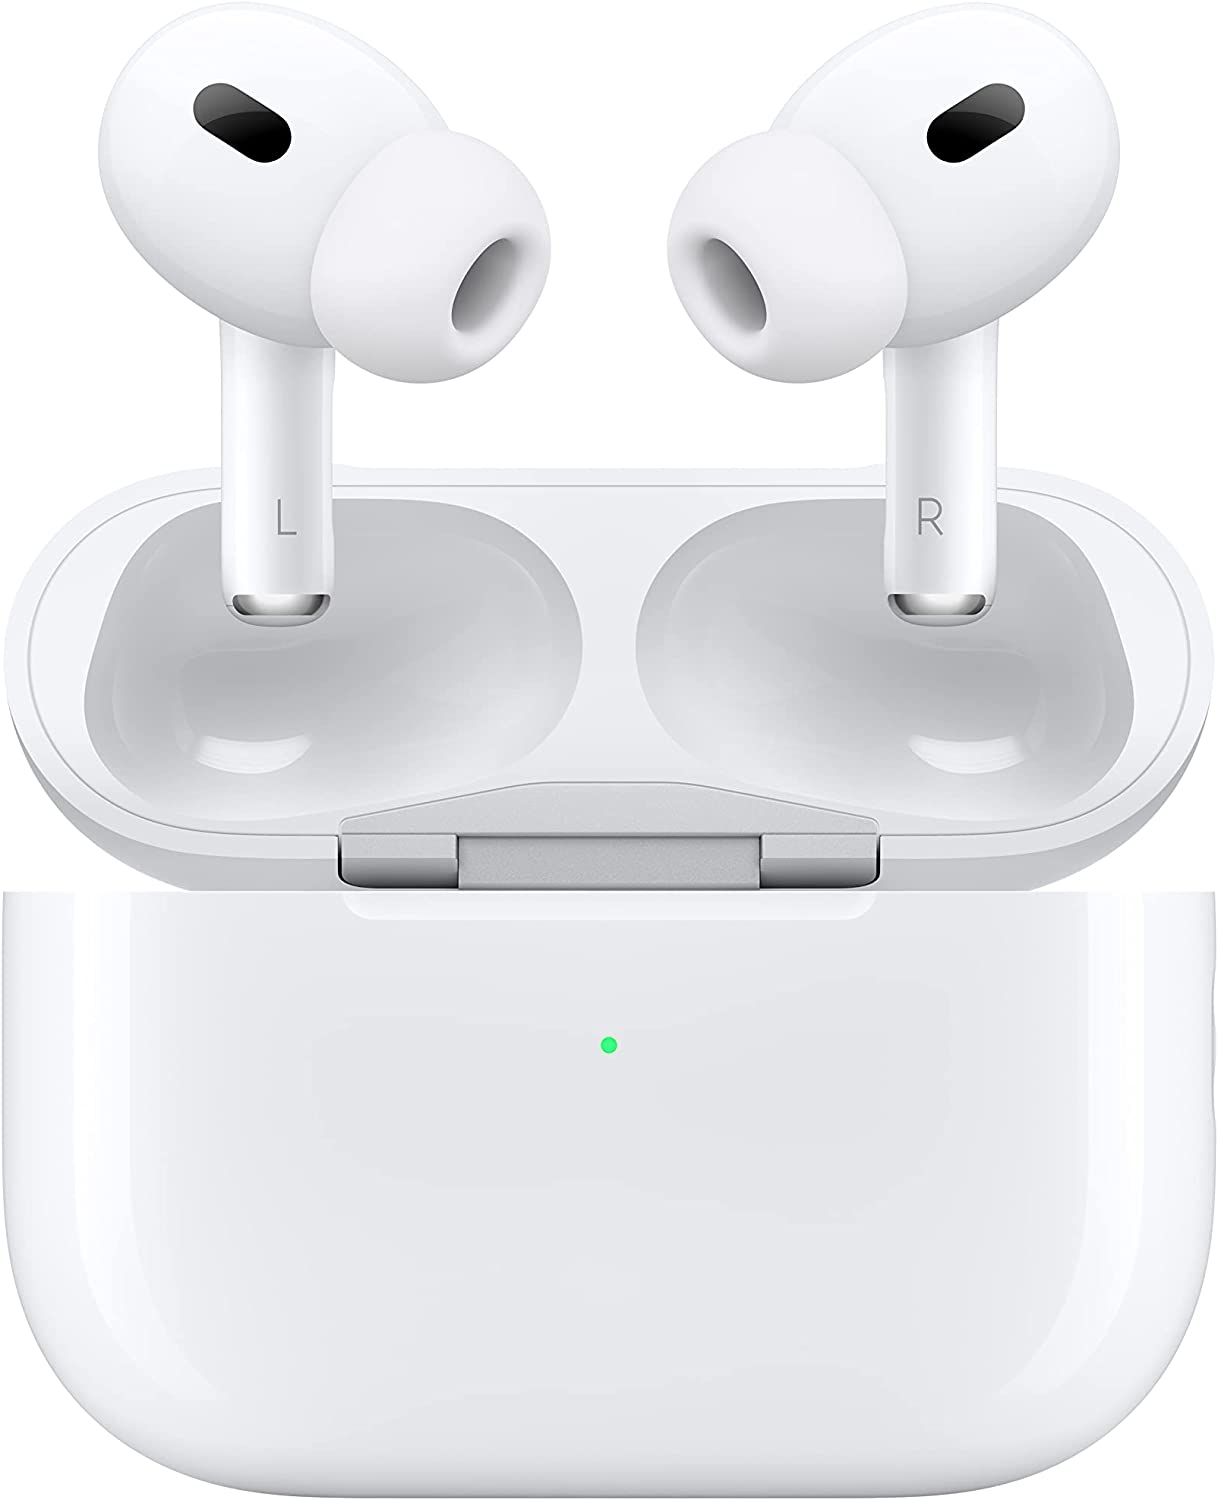 Staples In-Store Offer: Apple AirPods Pro 2nd Gen Earbuds w